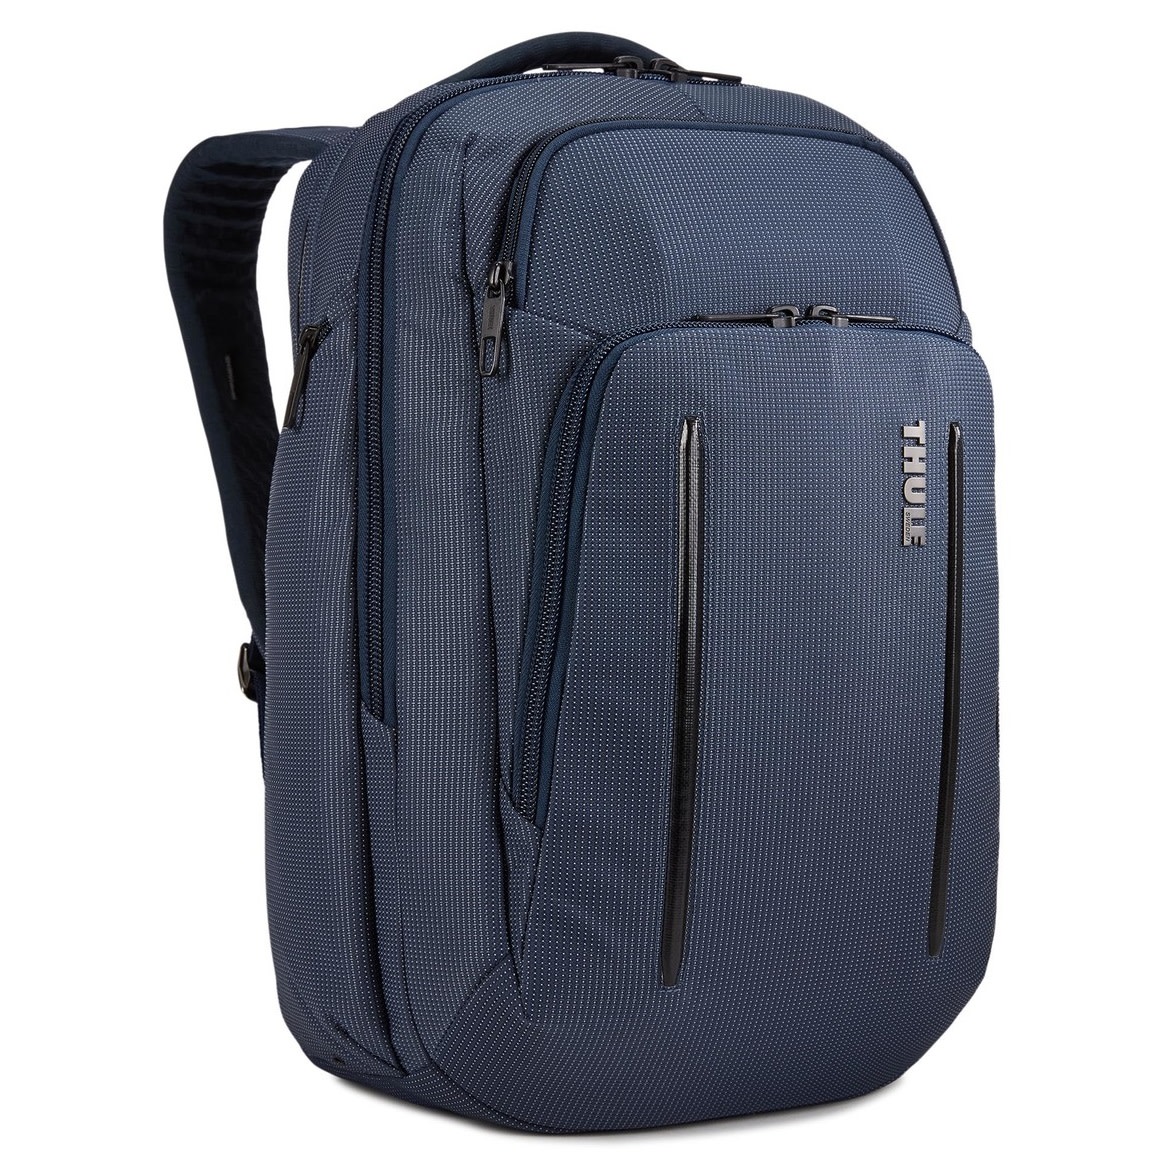 Thule Crossover 2 Backpack 30L DarkBlue